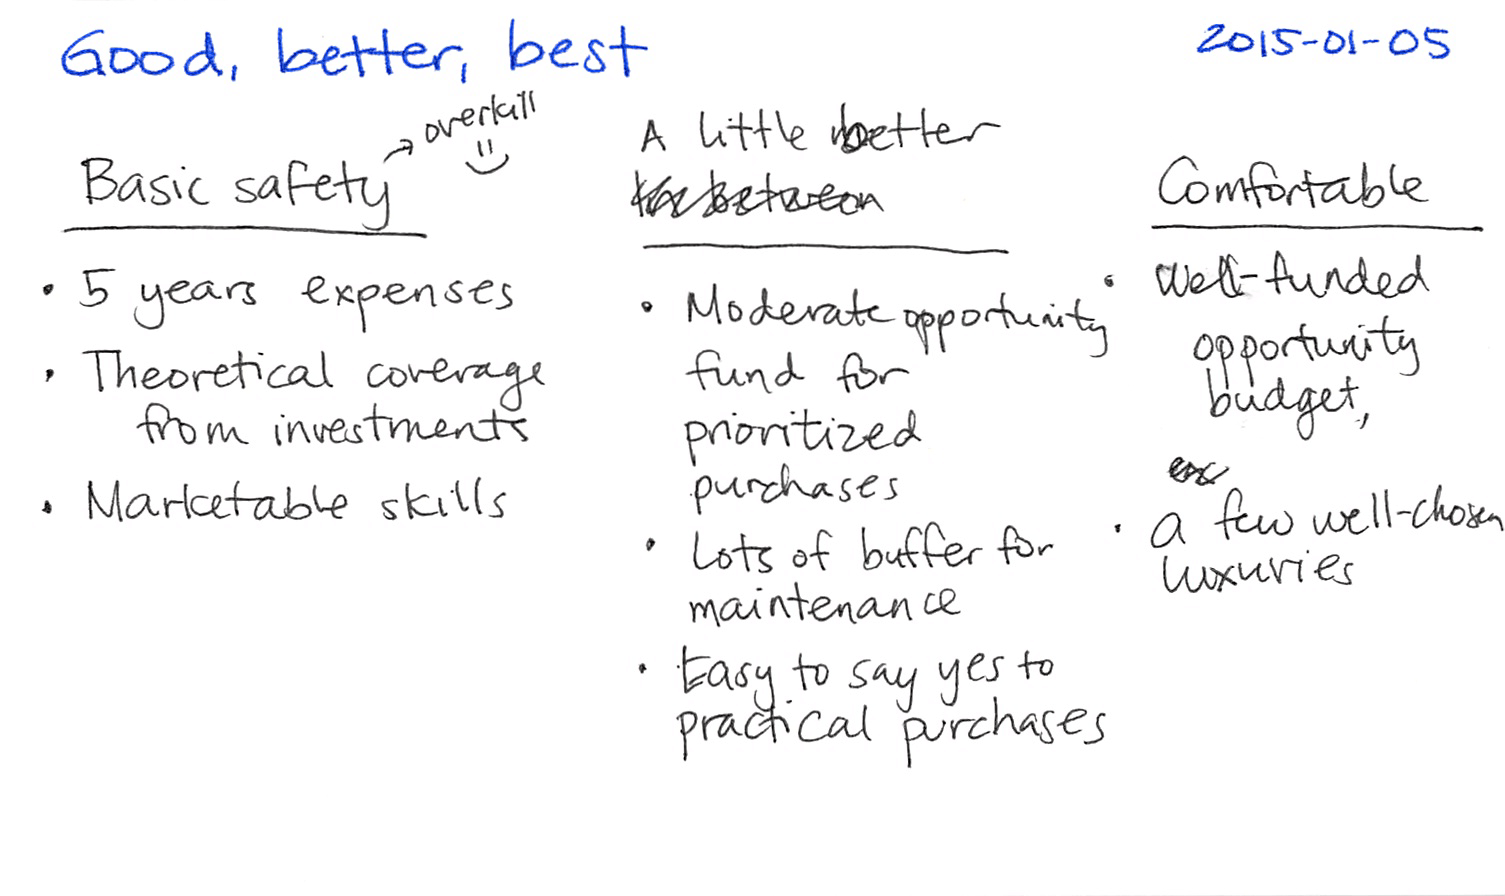 2015-01-06 Safe, a little better, comfortable -- index card.png